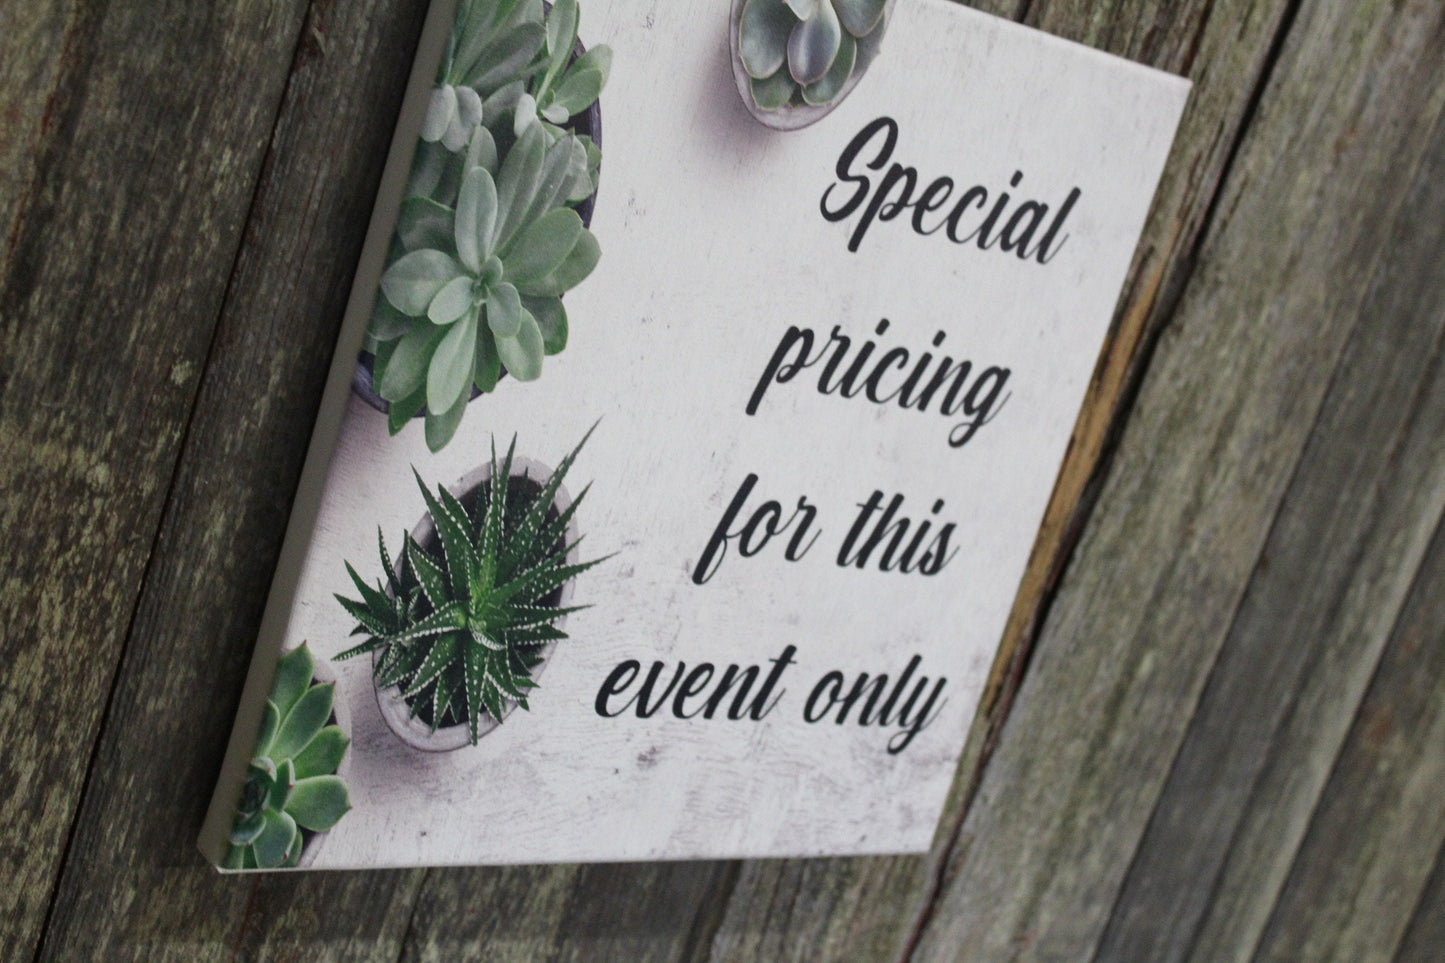 Vendor Booth Canvas Special Pricing For This Event Only Succulent Plants Organic Canvas Printed Sign For Small Business